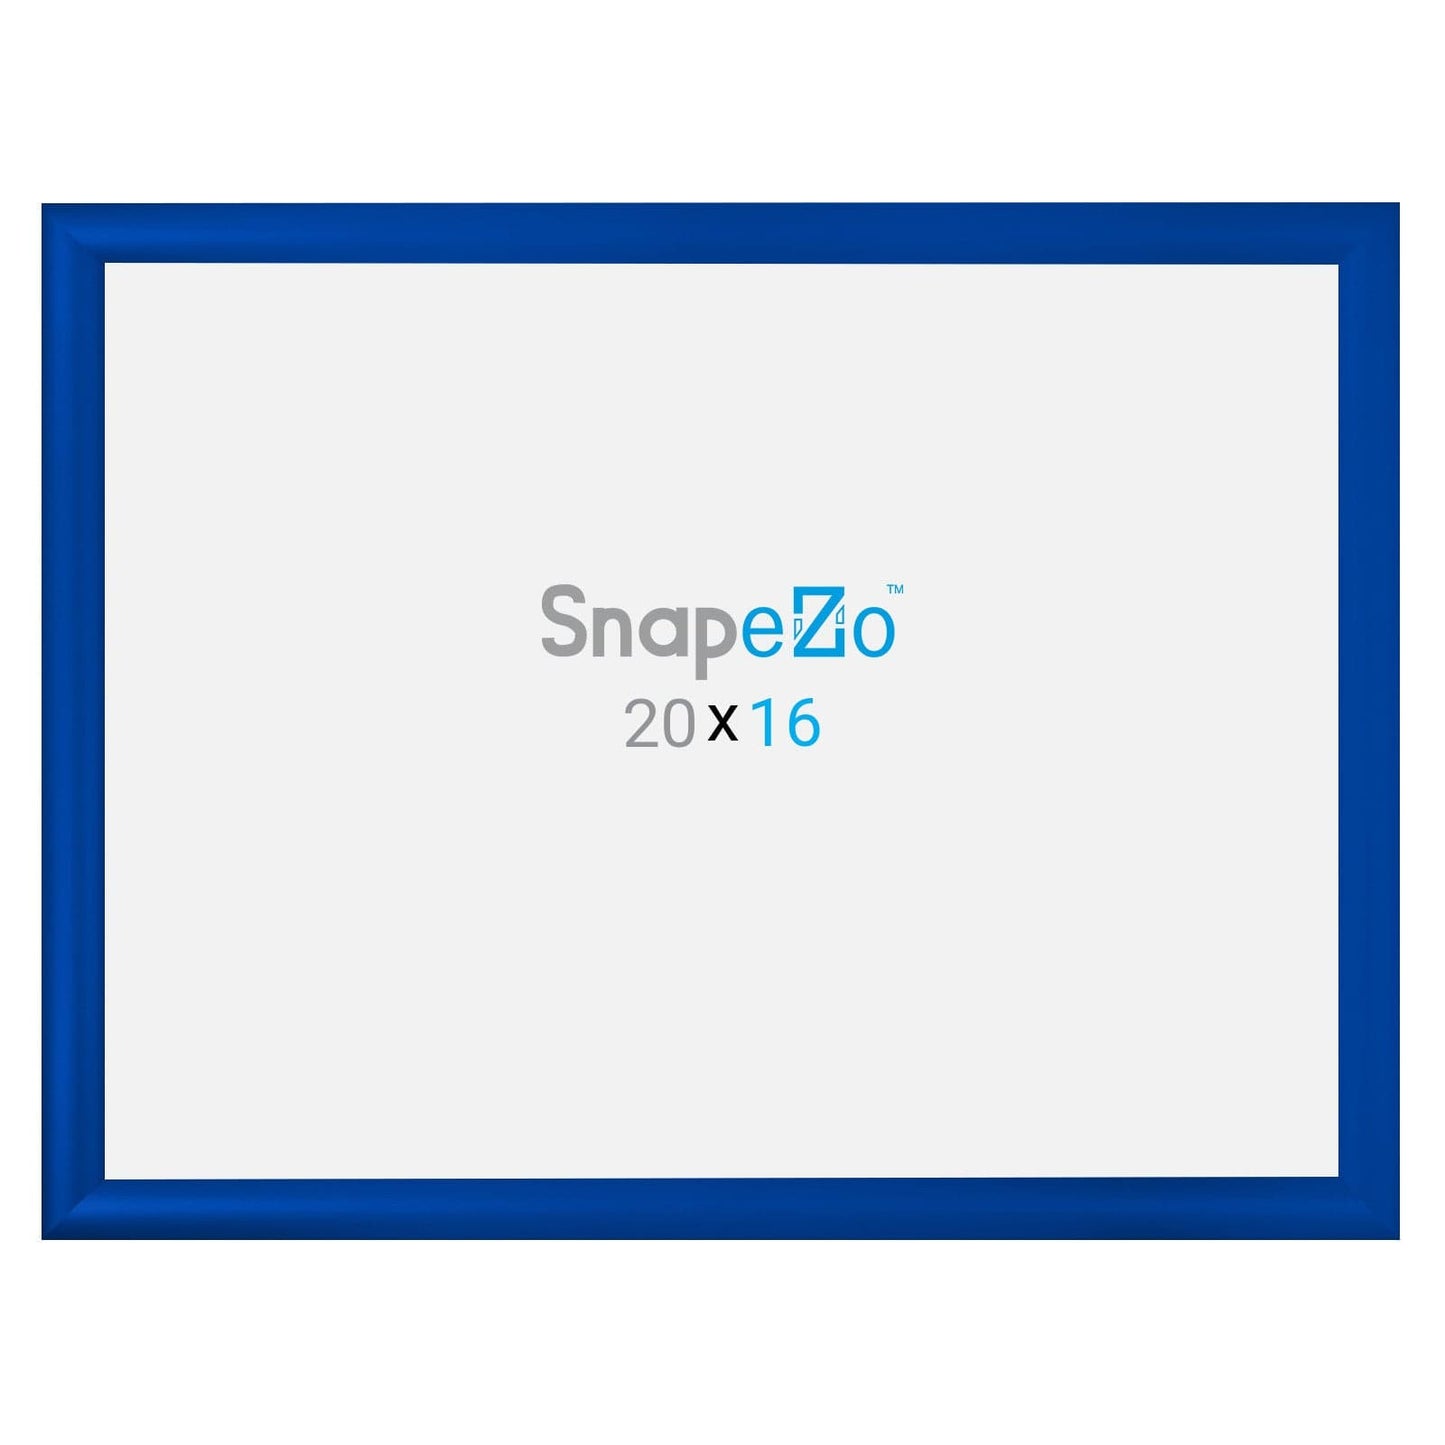 16x20 Blue SnapeZo® Snap Frame - 1.2" Profile - Snap Frames Direct